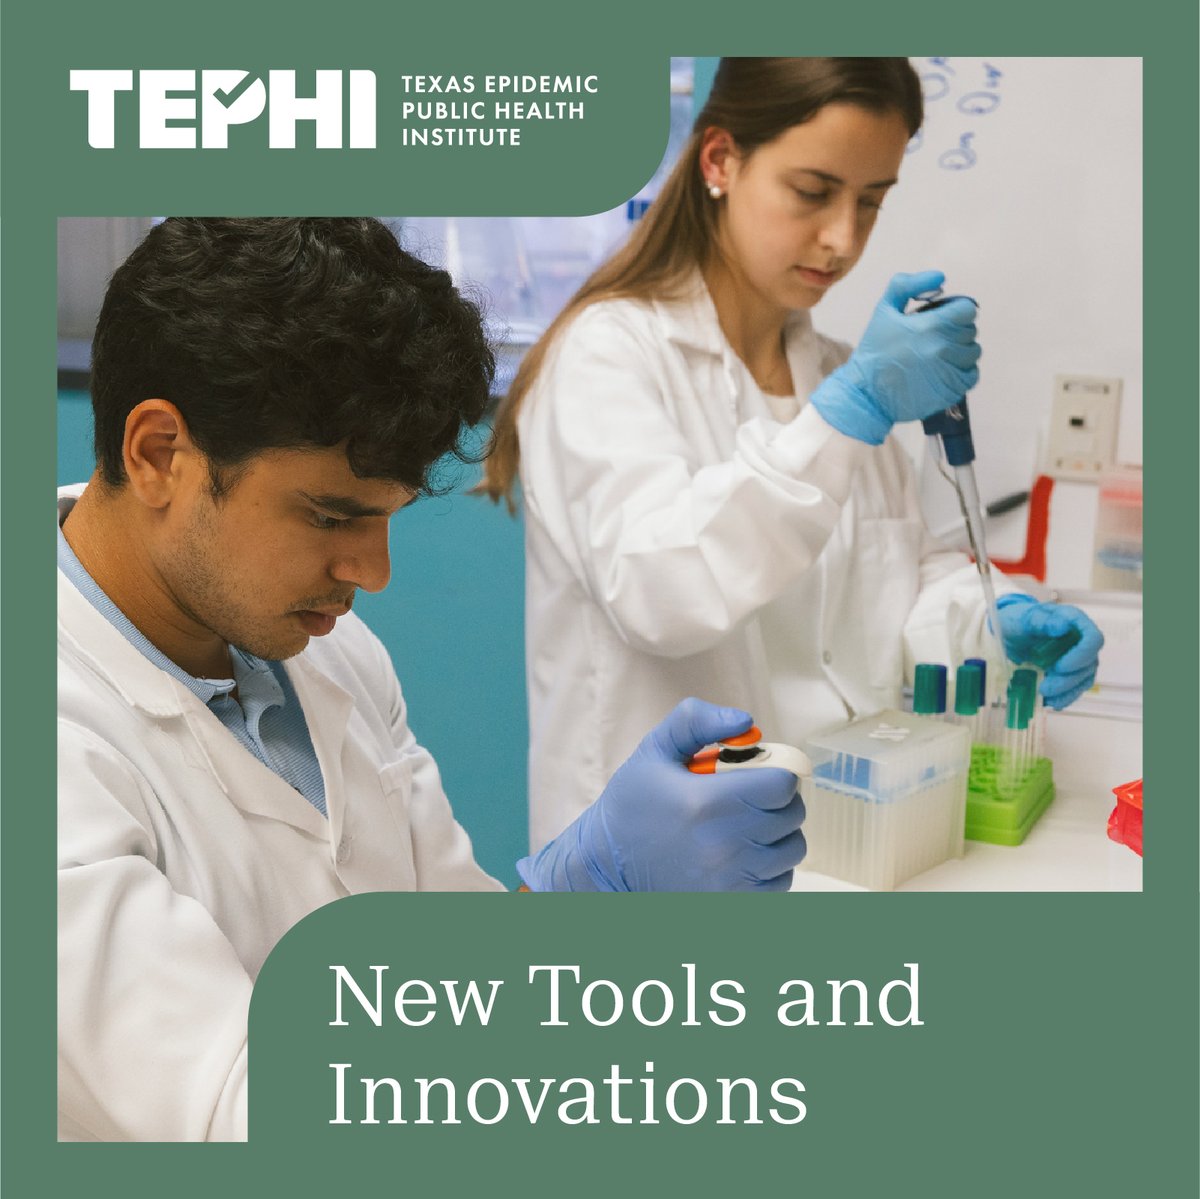 🔬💧 At TEPHI, we’re using innovative science and collaborating with partners from many sectors to identify emerging threats early – a key component to outbreak preparedness. Catch a recap of our Annual Texas Public Health Summit: tephi.texas.gov/events/txphs #NPHW